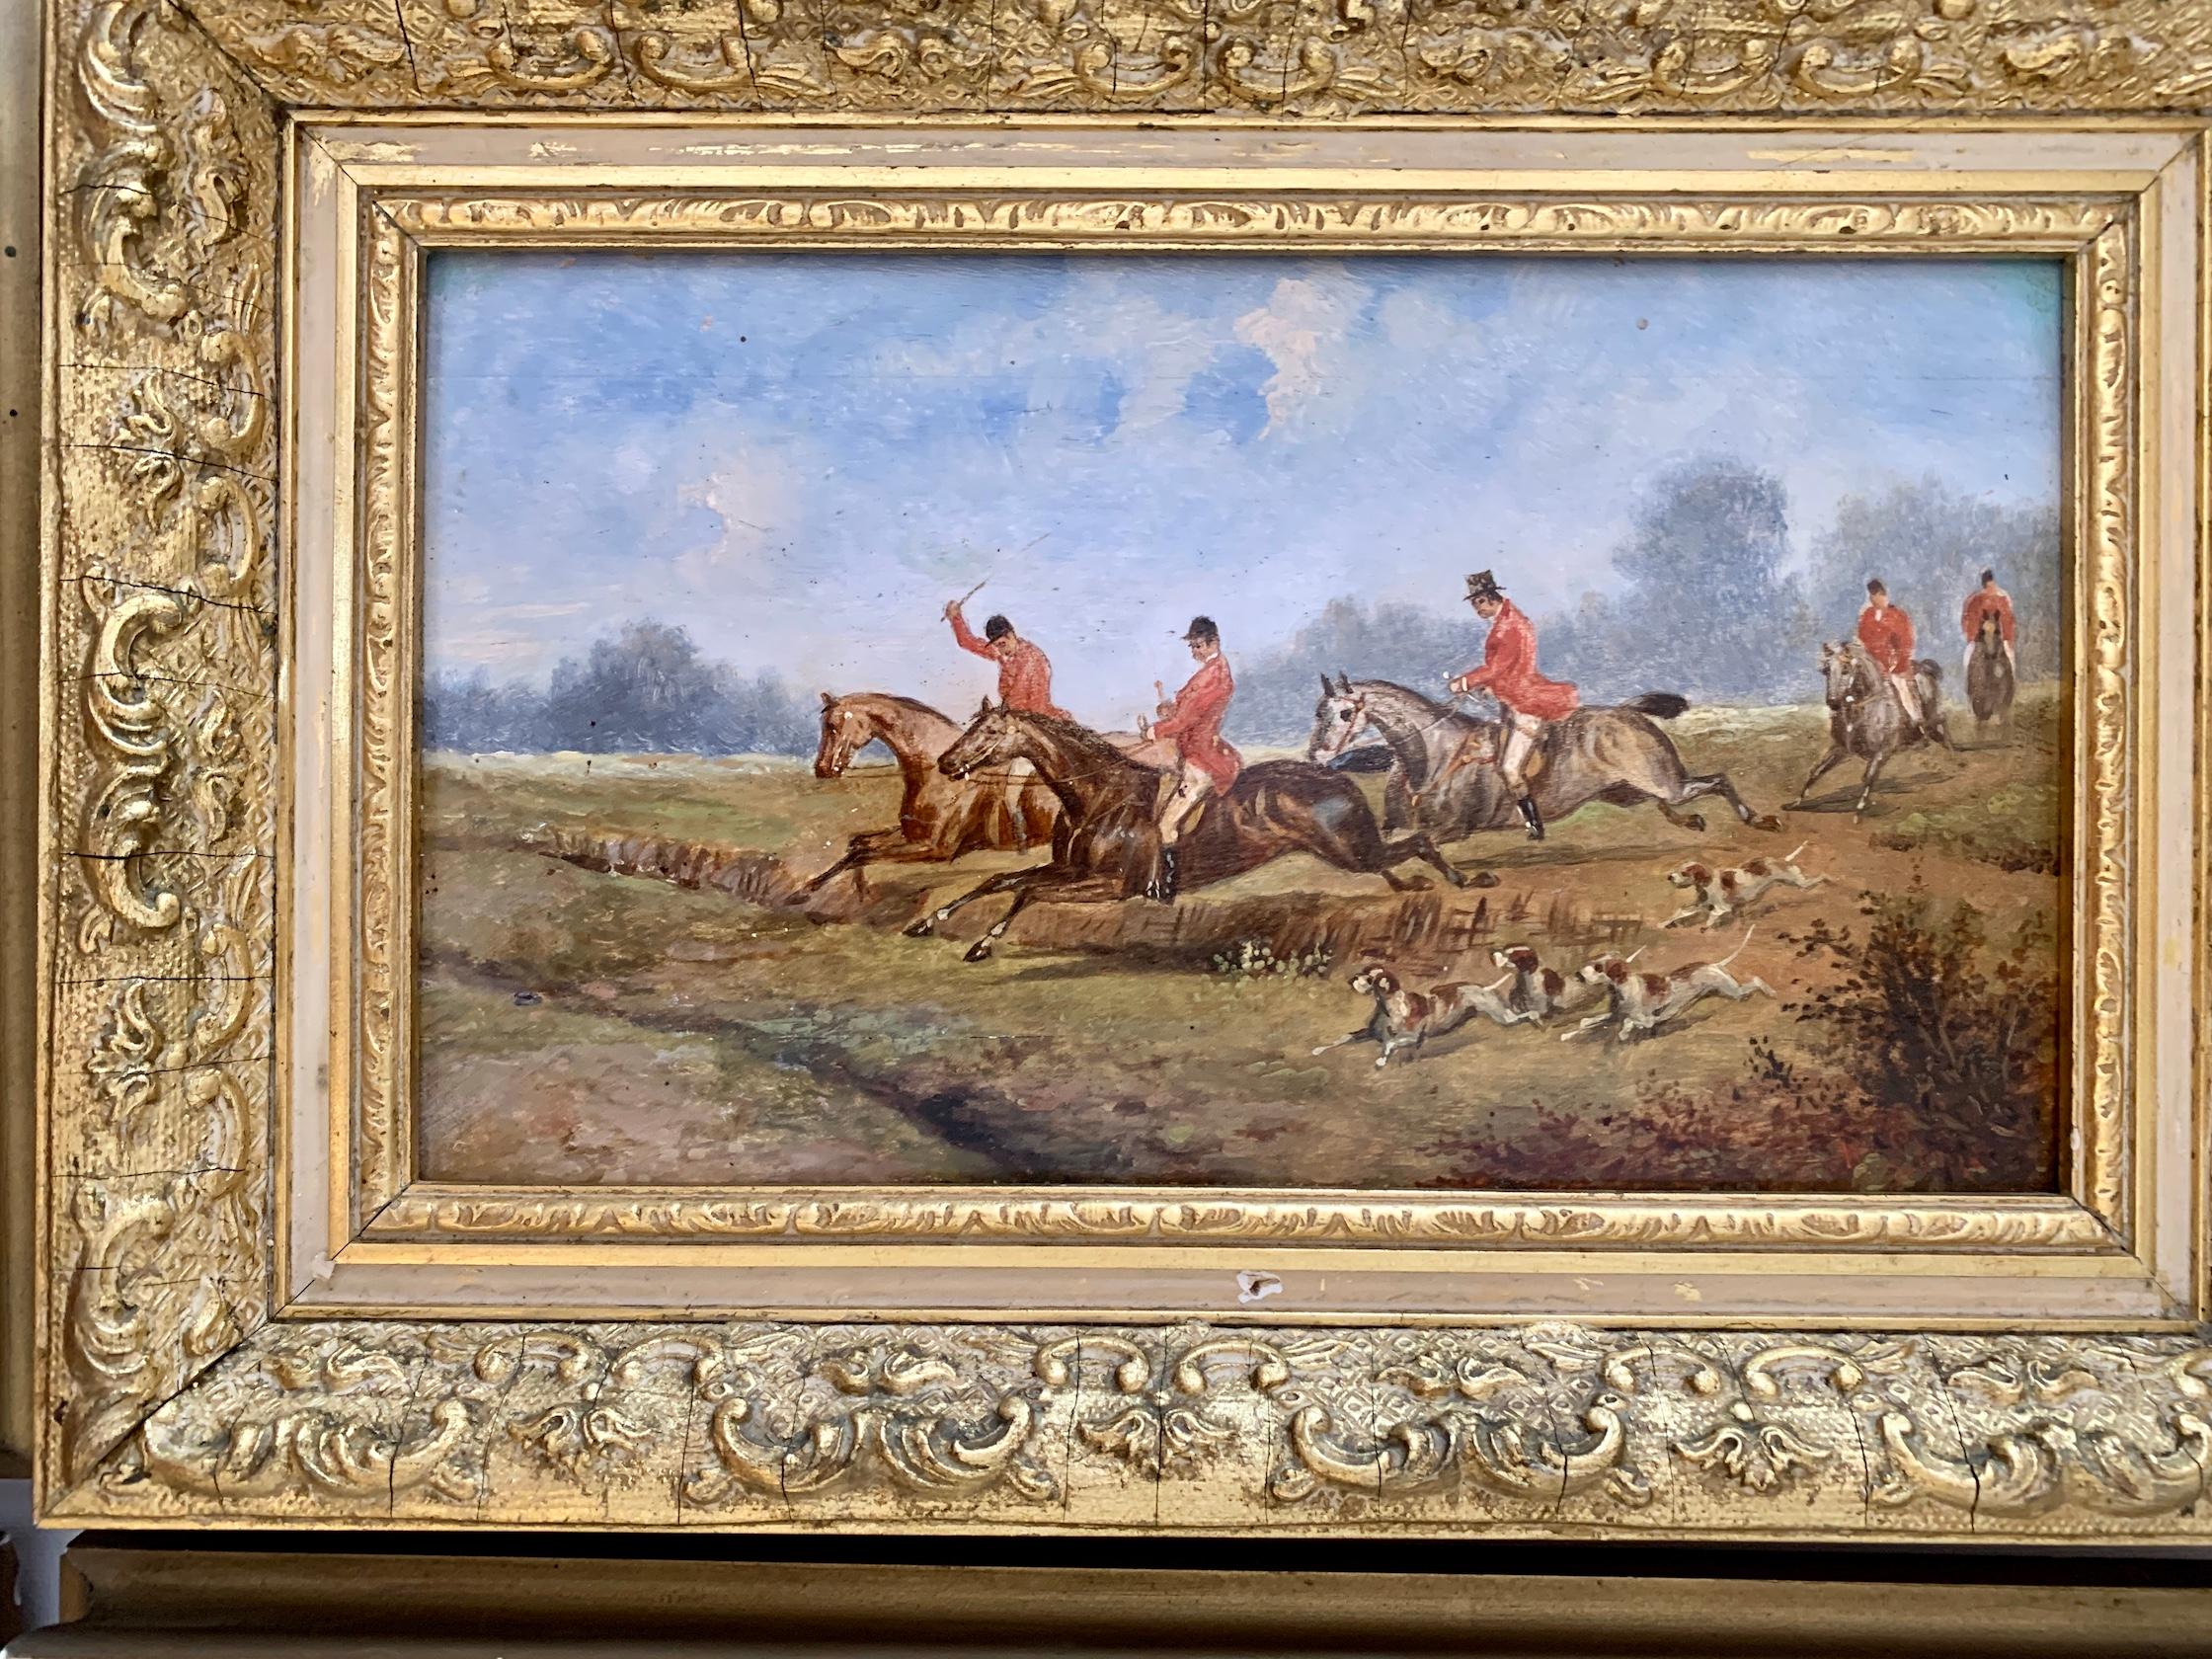 19th century Set of 4 Fox hunting scenes in a landscape, with hounds, huntsmen - Victorian Painting by Rudolph Stone